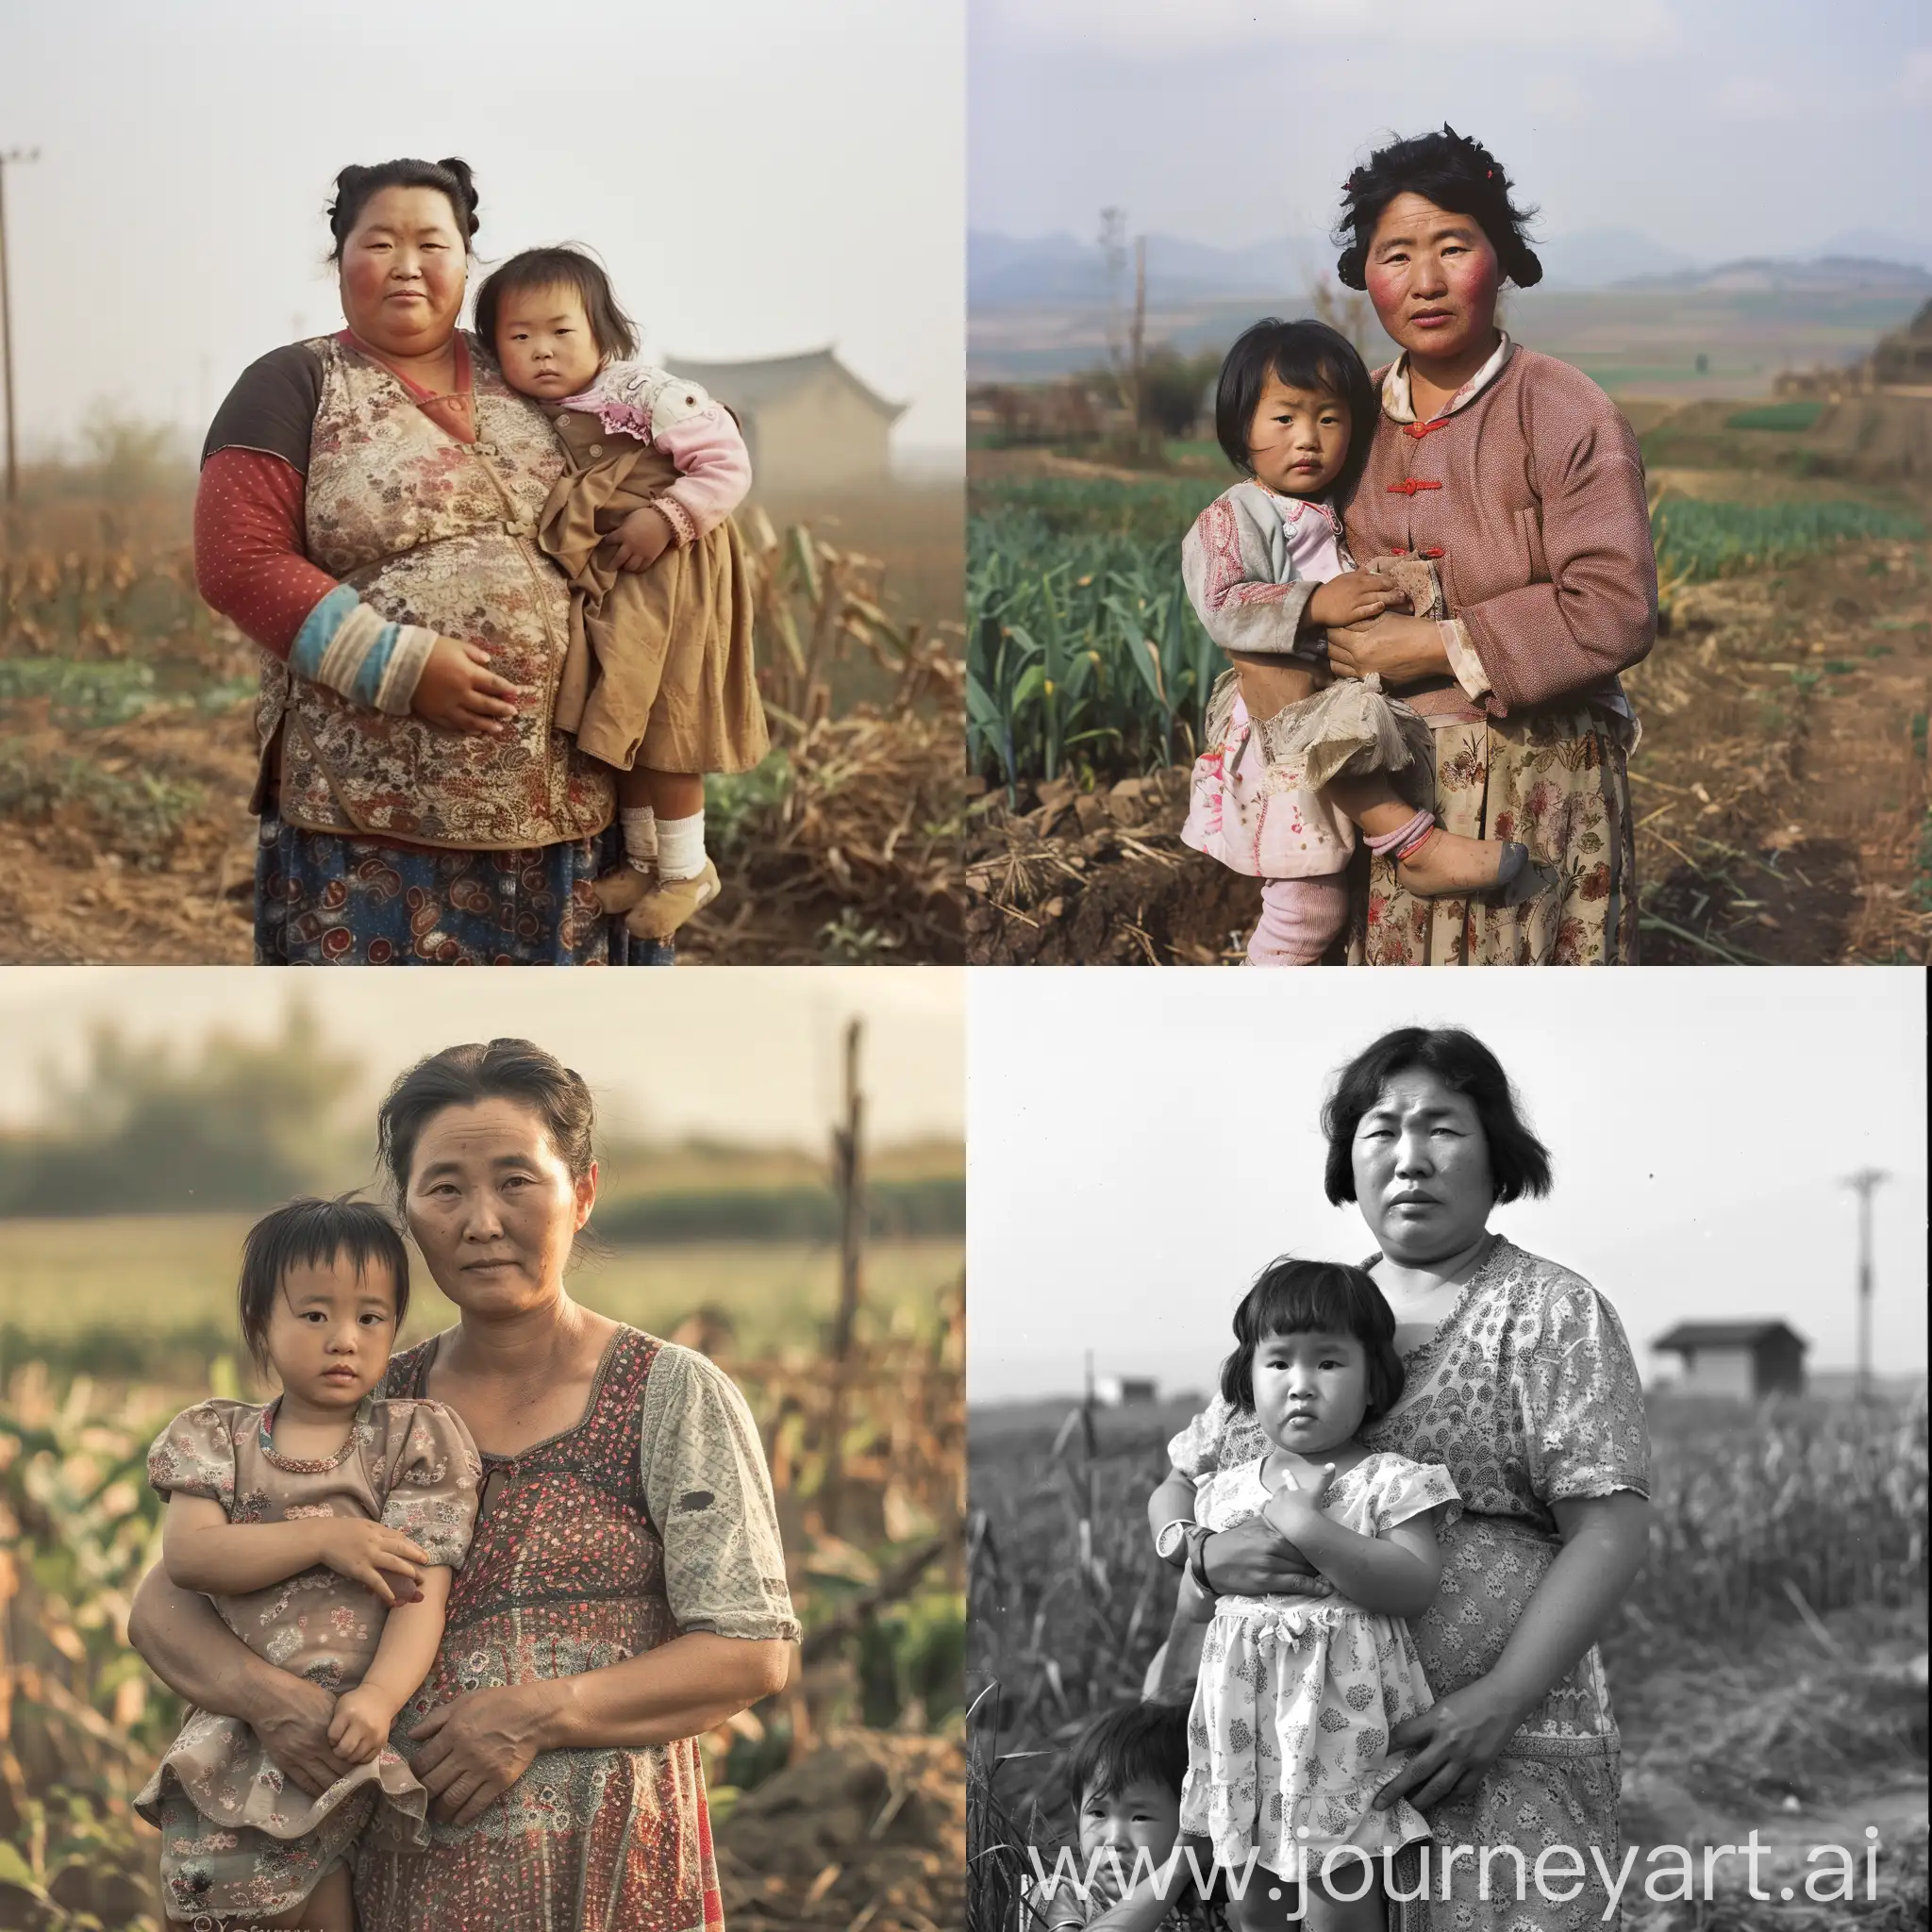 Rural-Chinese-Woman-Holding-Toddler-in-Field